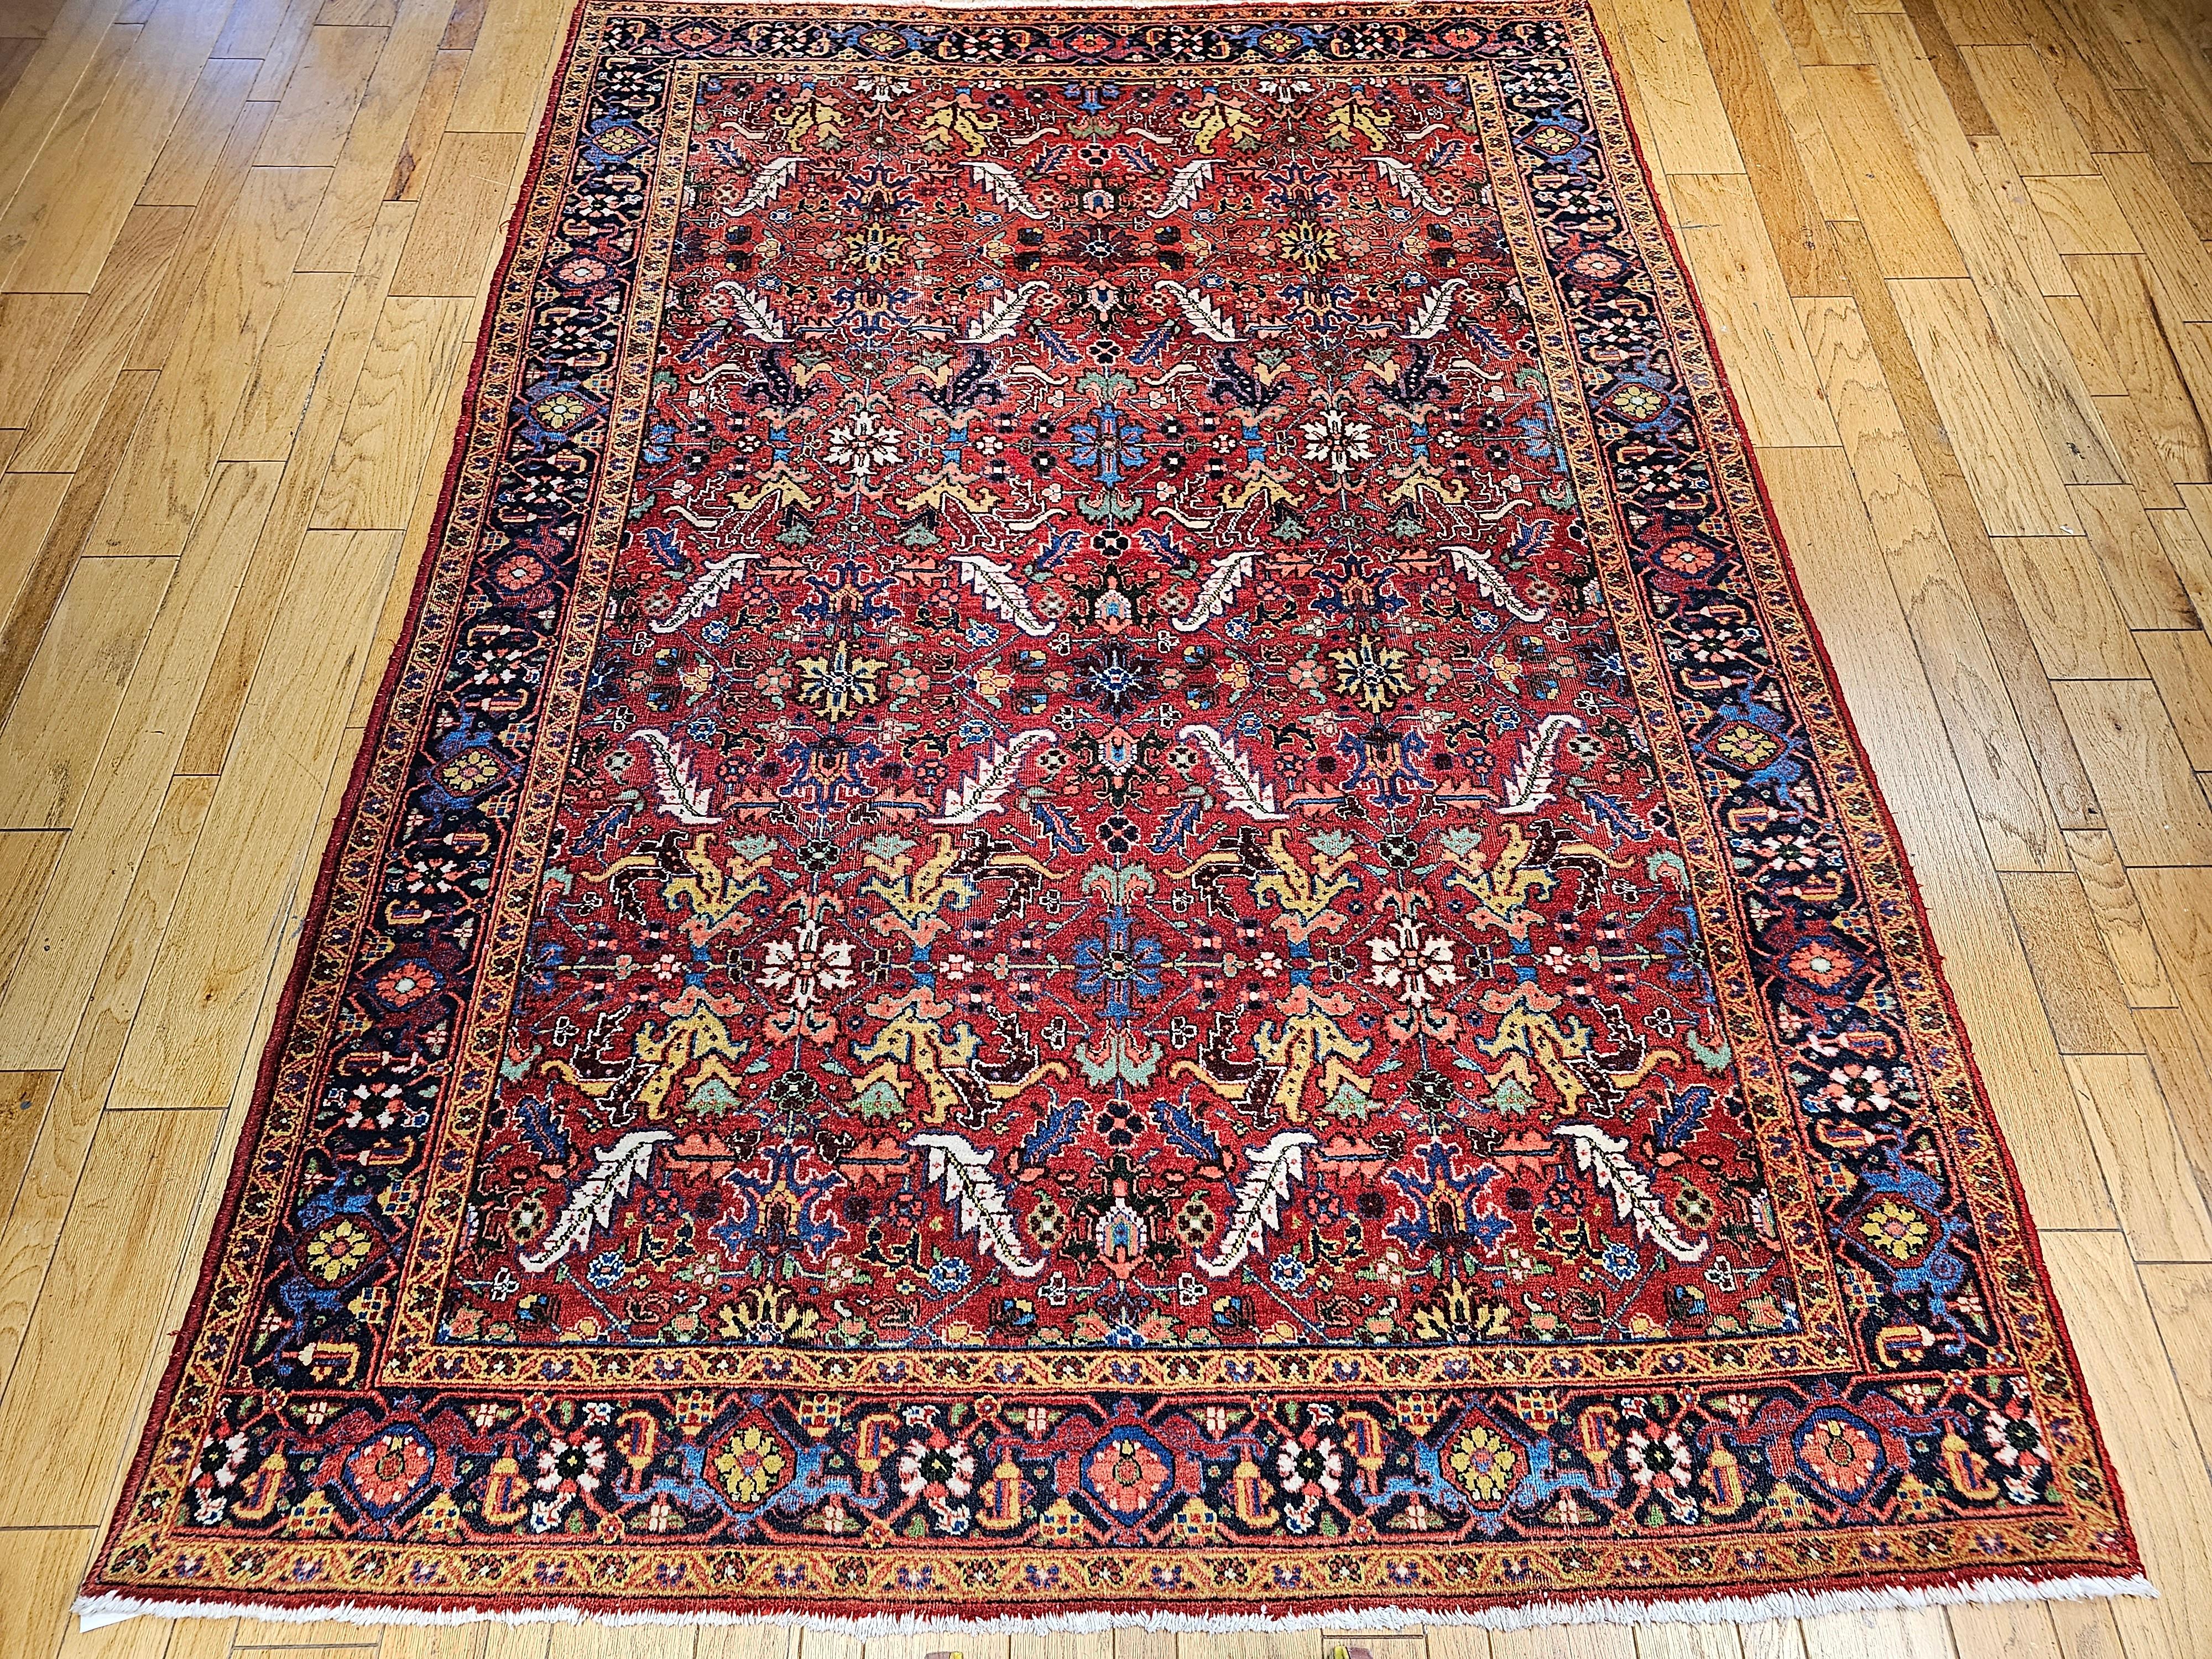  A beautiful vintage Persian Heriz Serapi room size rug from the early 1900s in an allover pattern.  The beautiful and colorful vintage Heriz is in an allover pattern which makes this an extremely desirable room-size rug. The madder color field with